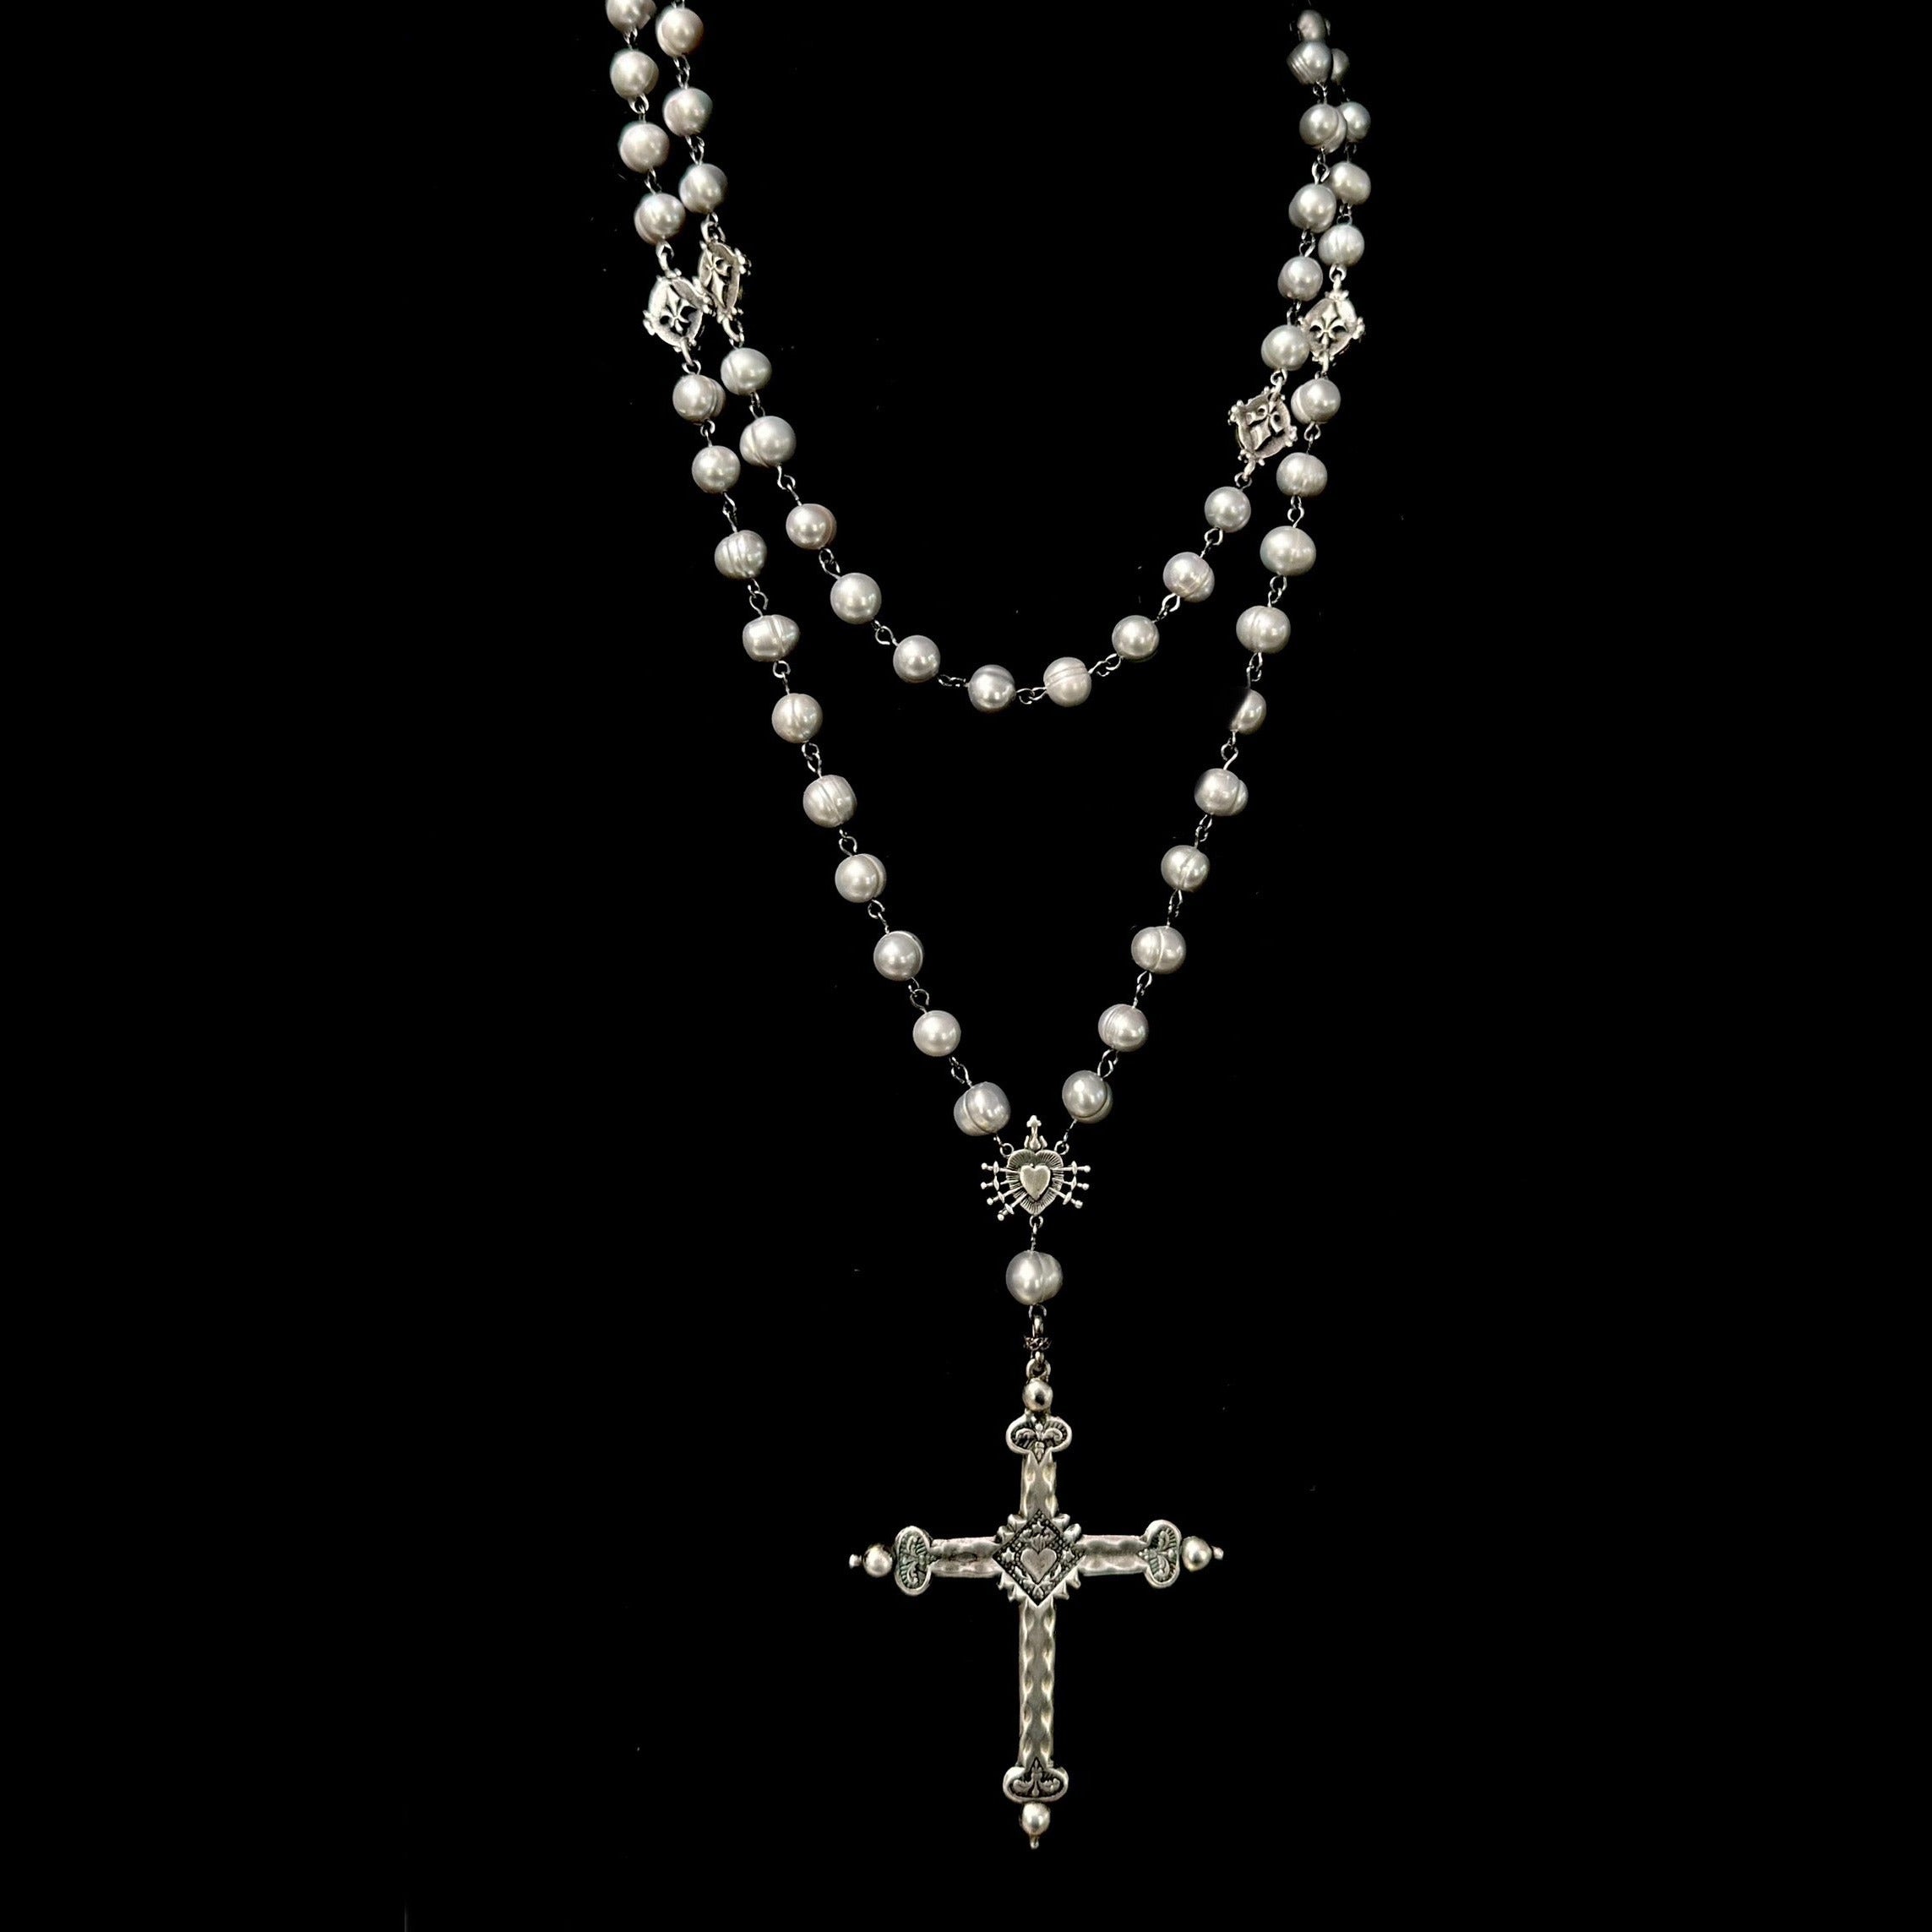 FOUND AMBITION – Pearl rosary